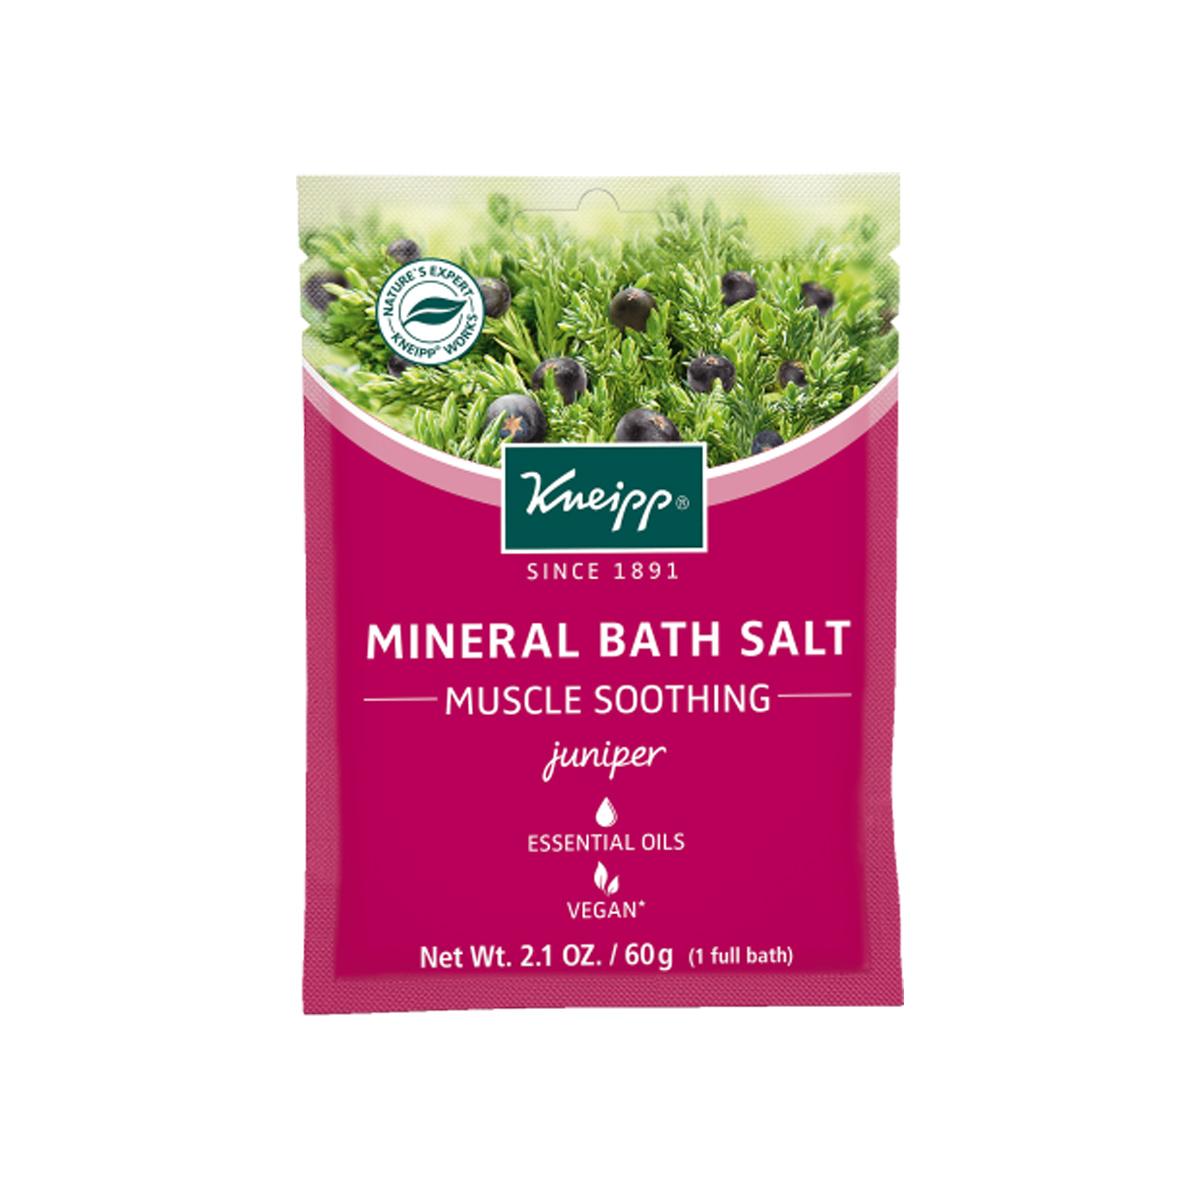 Primary image of Bath Salt- Muscle Soothing